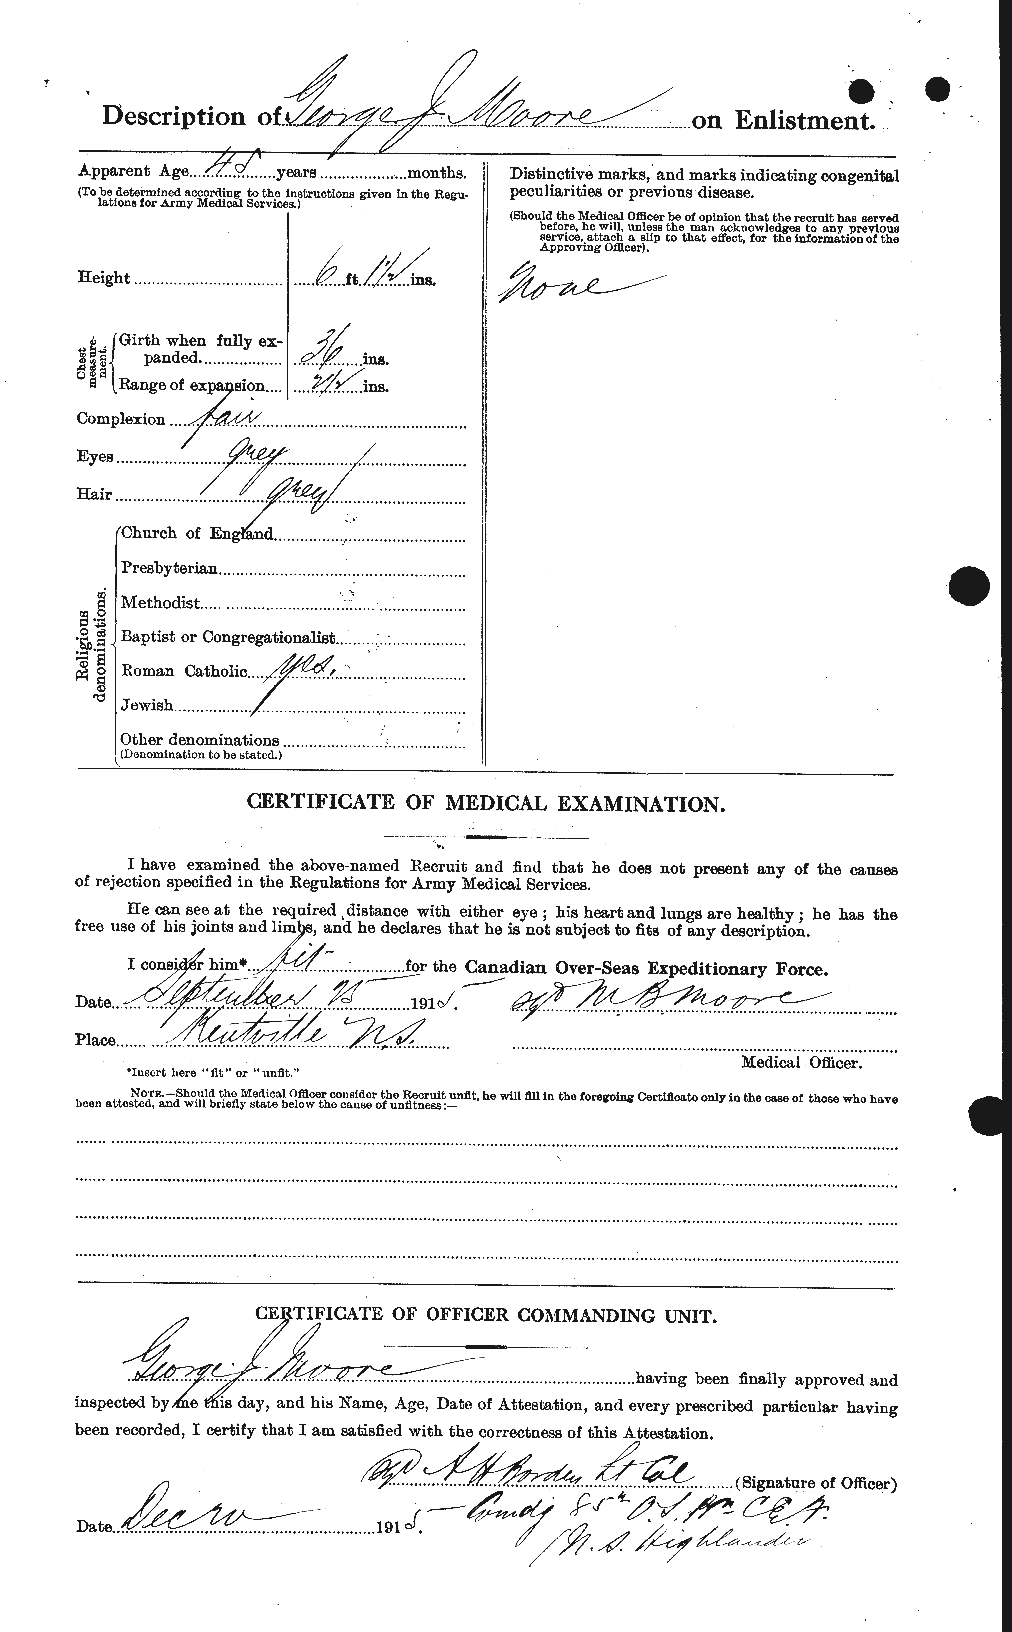 Personnel Records of the First World War - CEF 502015b